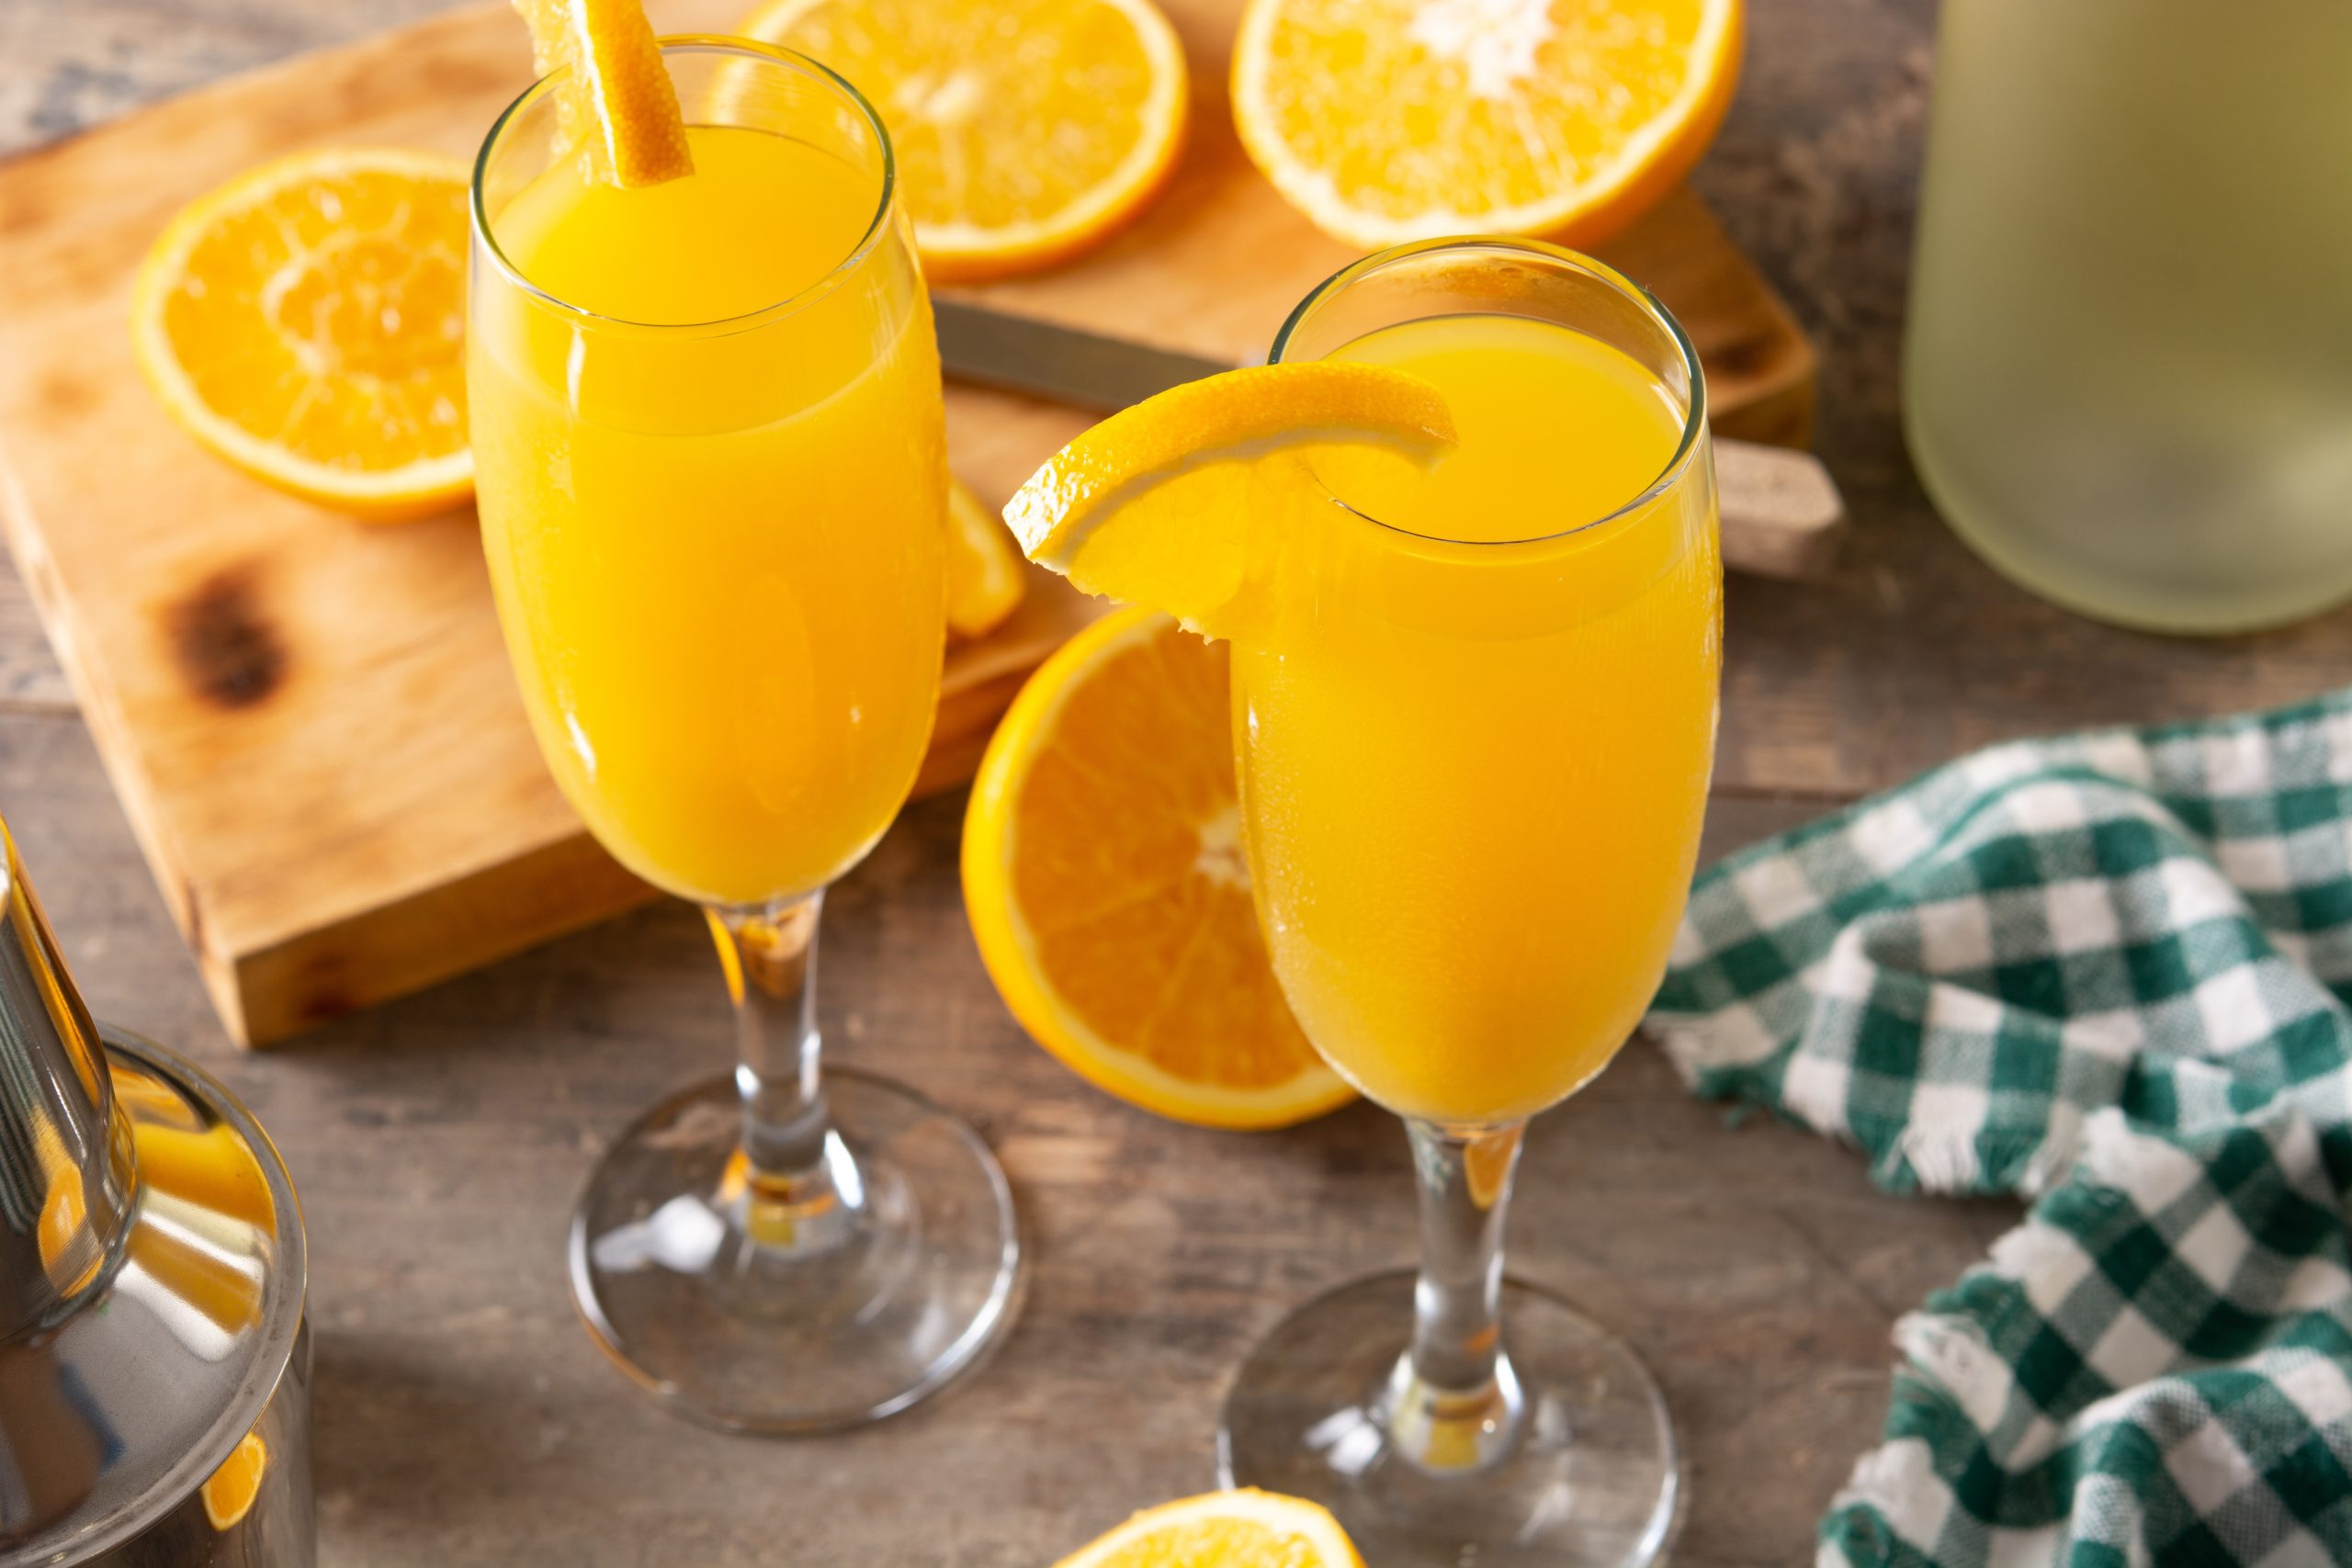 Sip Your Way Through Dallas-Fort Worth: 20 of The Best Mimosa Deals